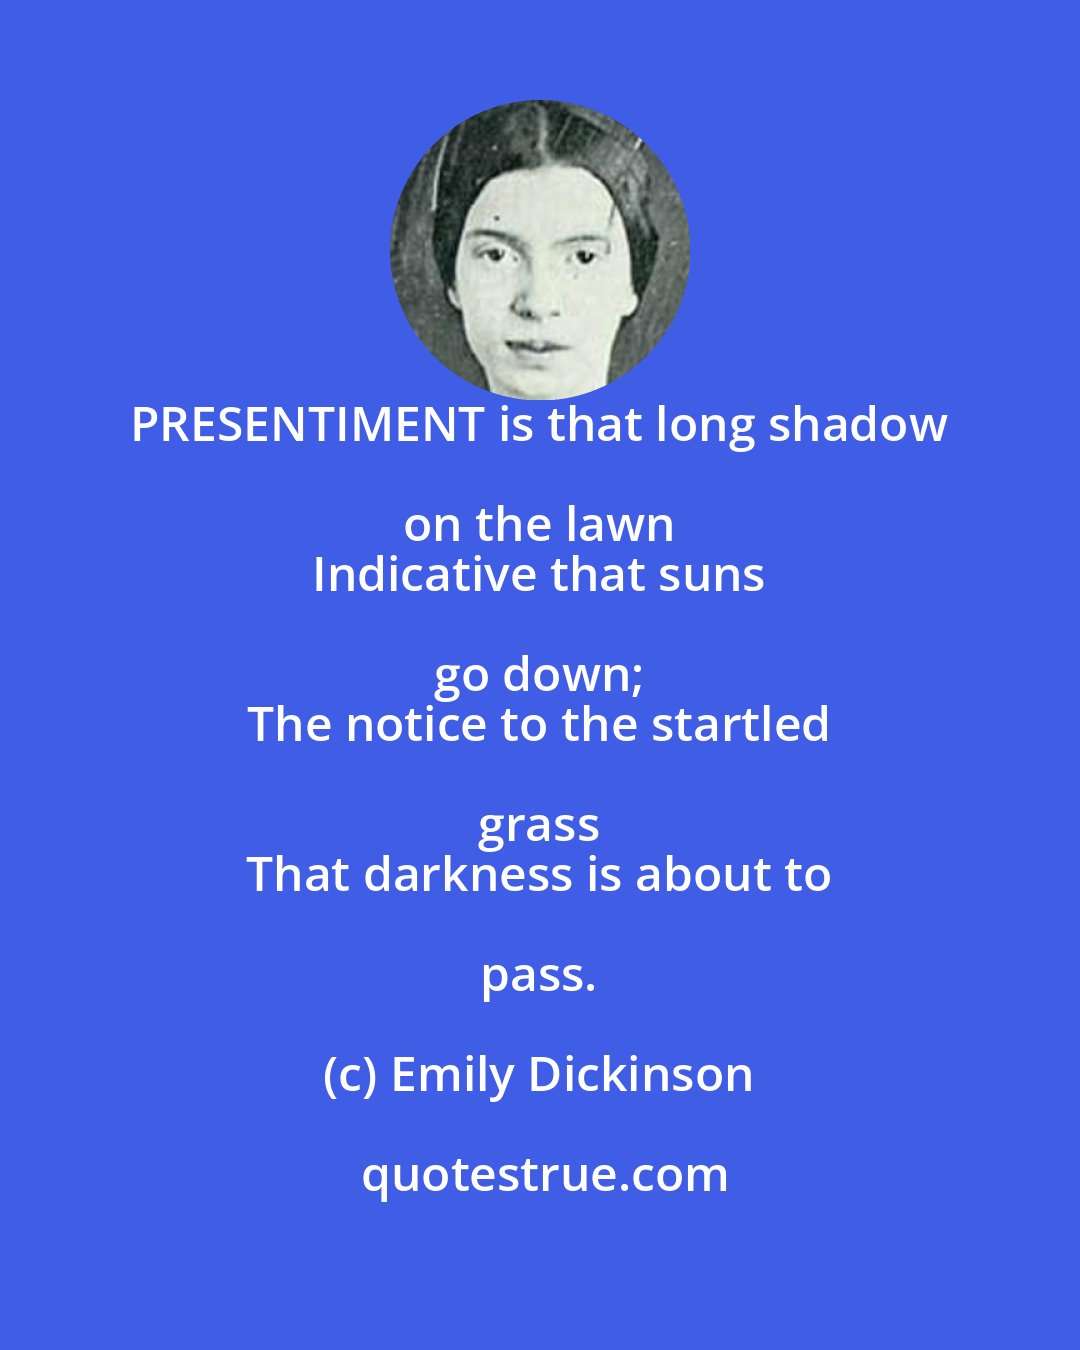 Emily Dickinson: PRESENTIMENT is that long shadow on the lawn 
 Indicative that suns go down; 
 The notice to the startled grass 
 That darkness is about to pass.